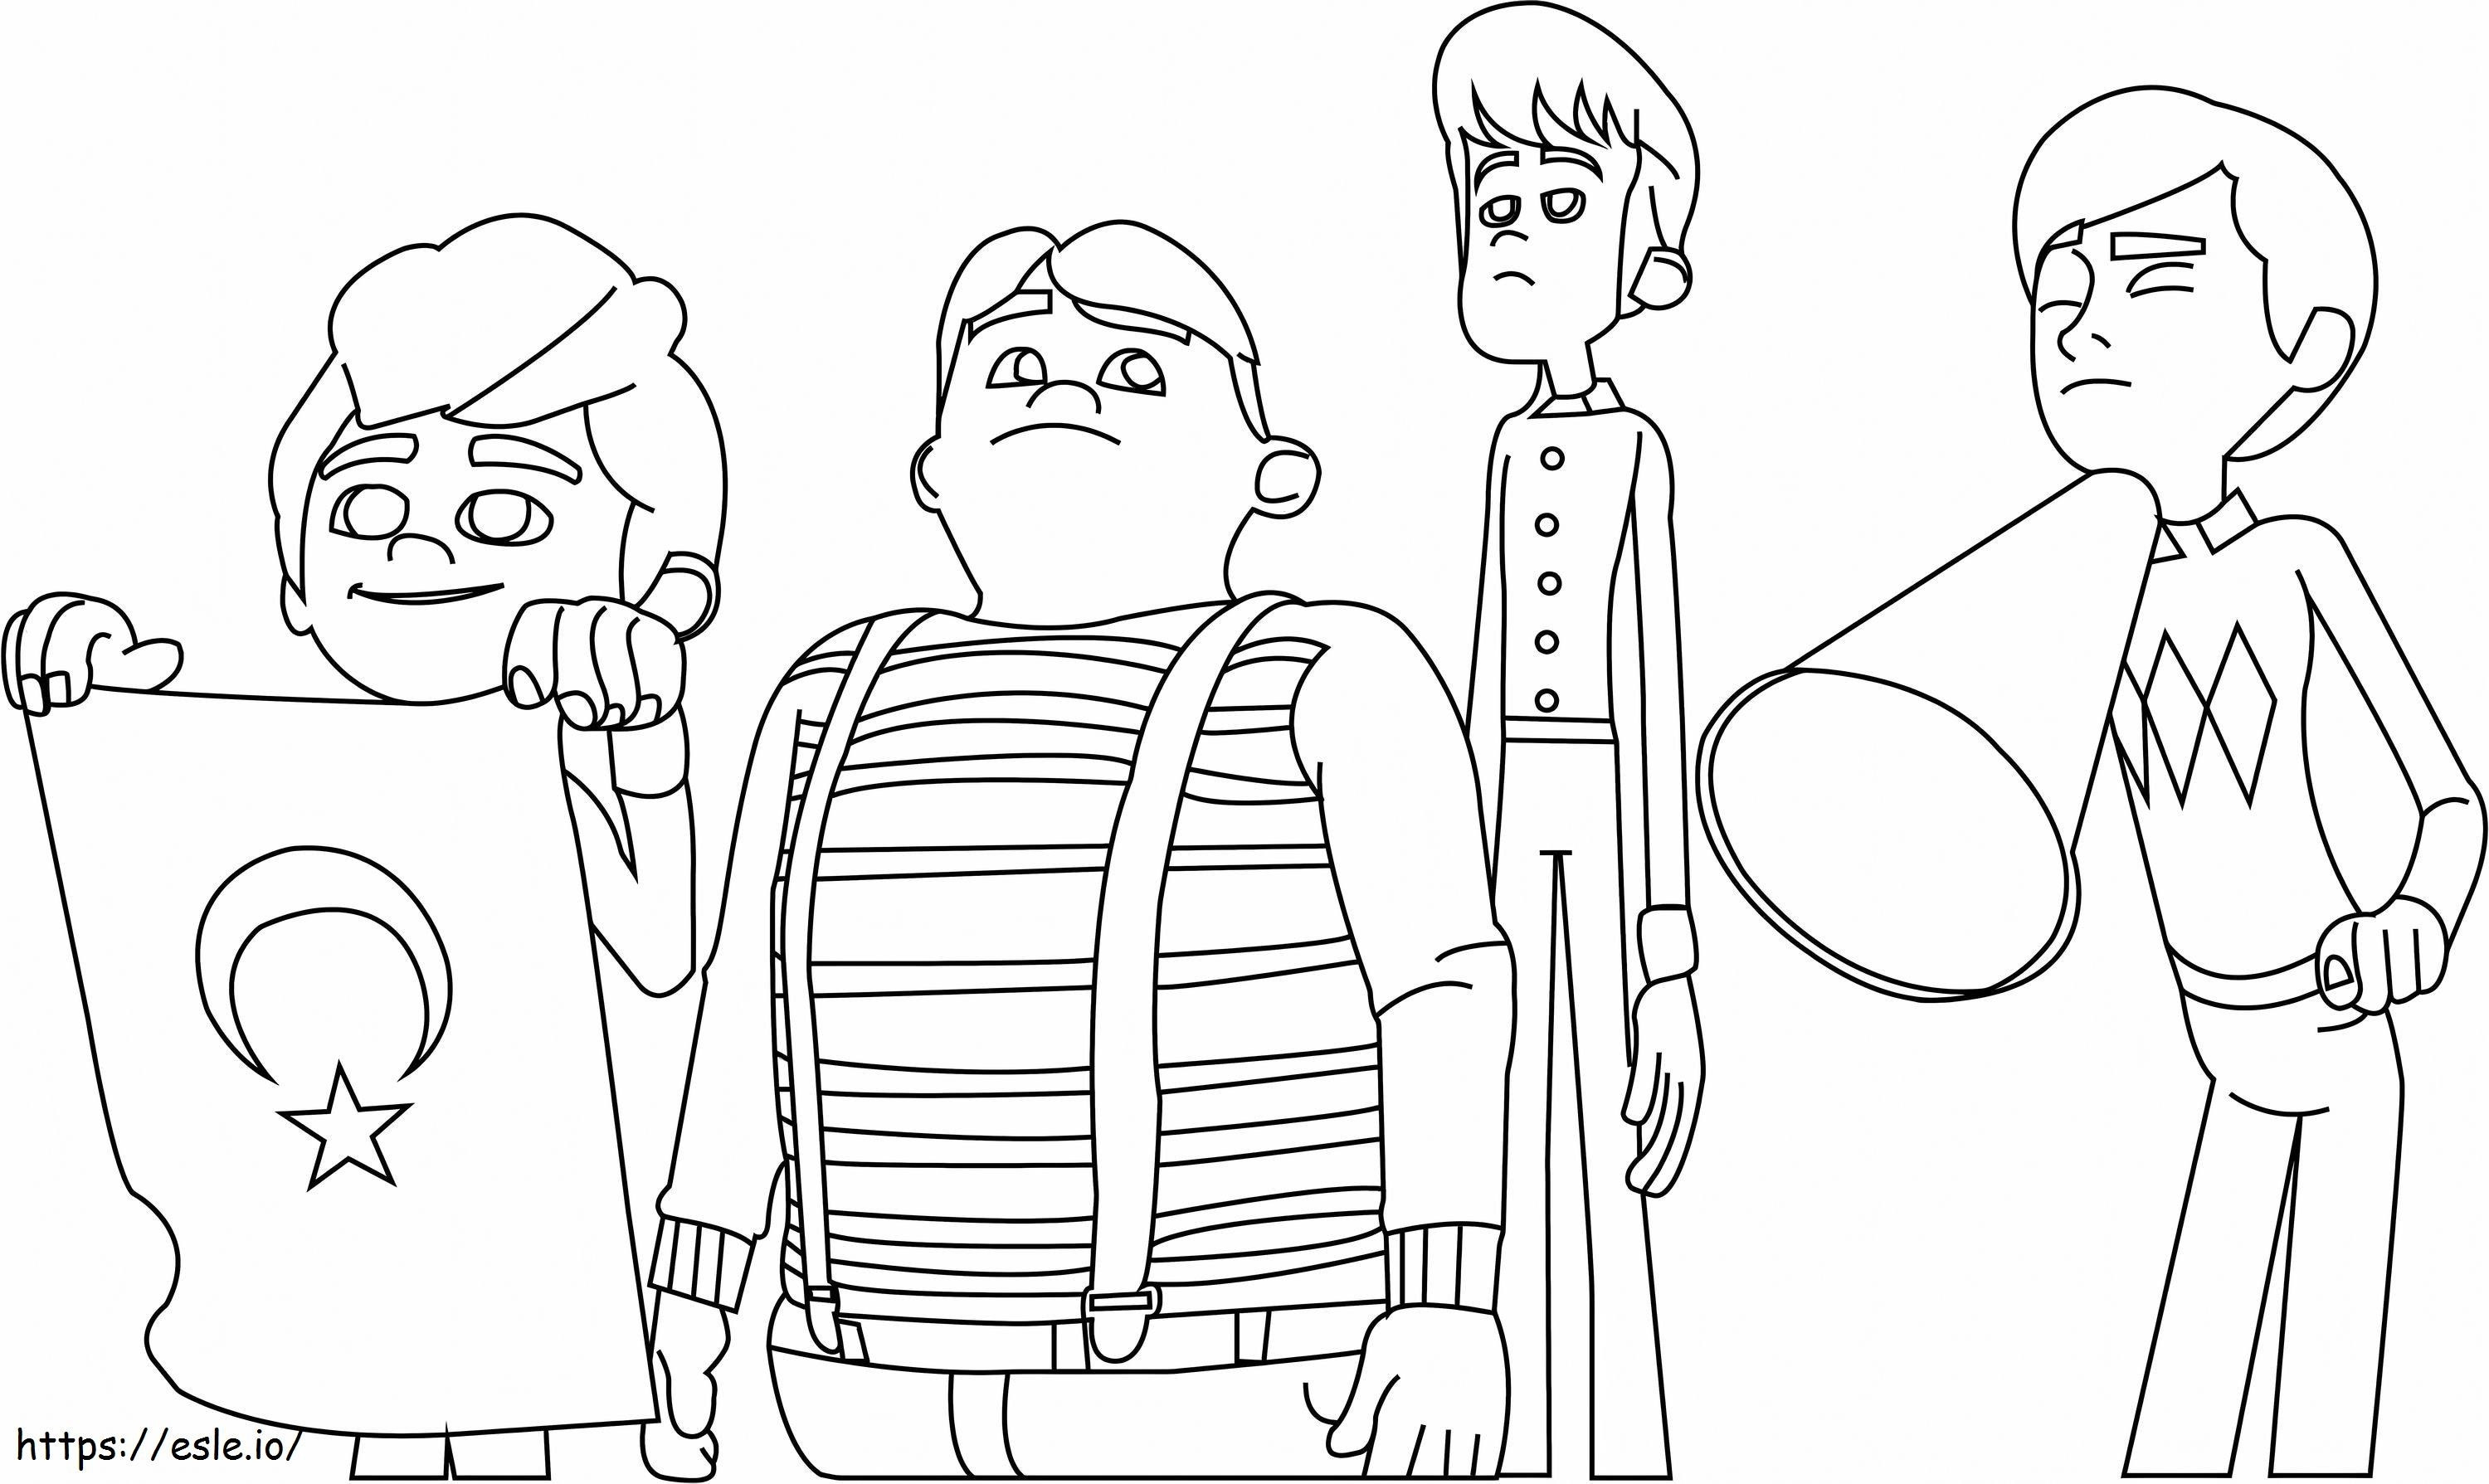 Soft-Boiled Team Equipo coloring page